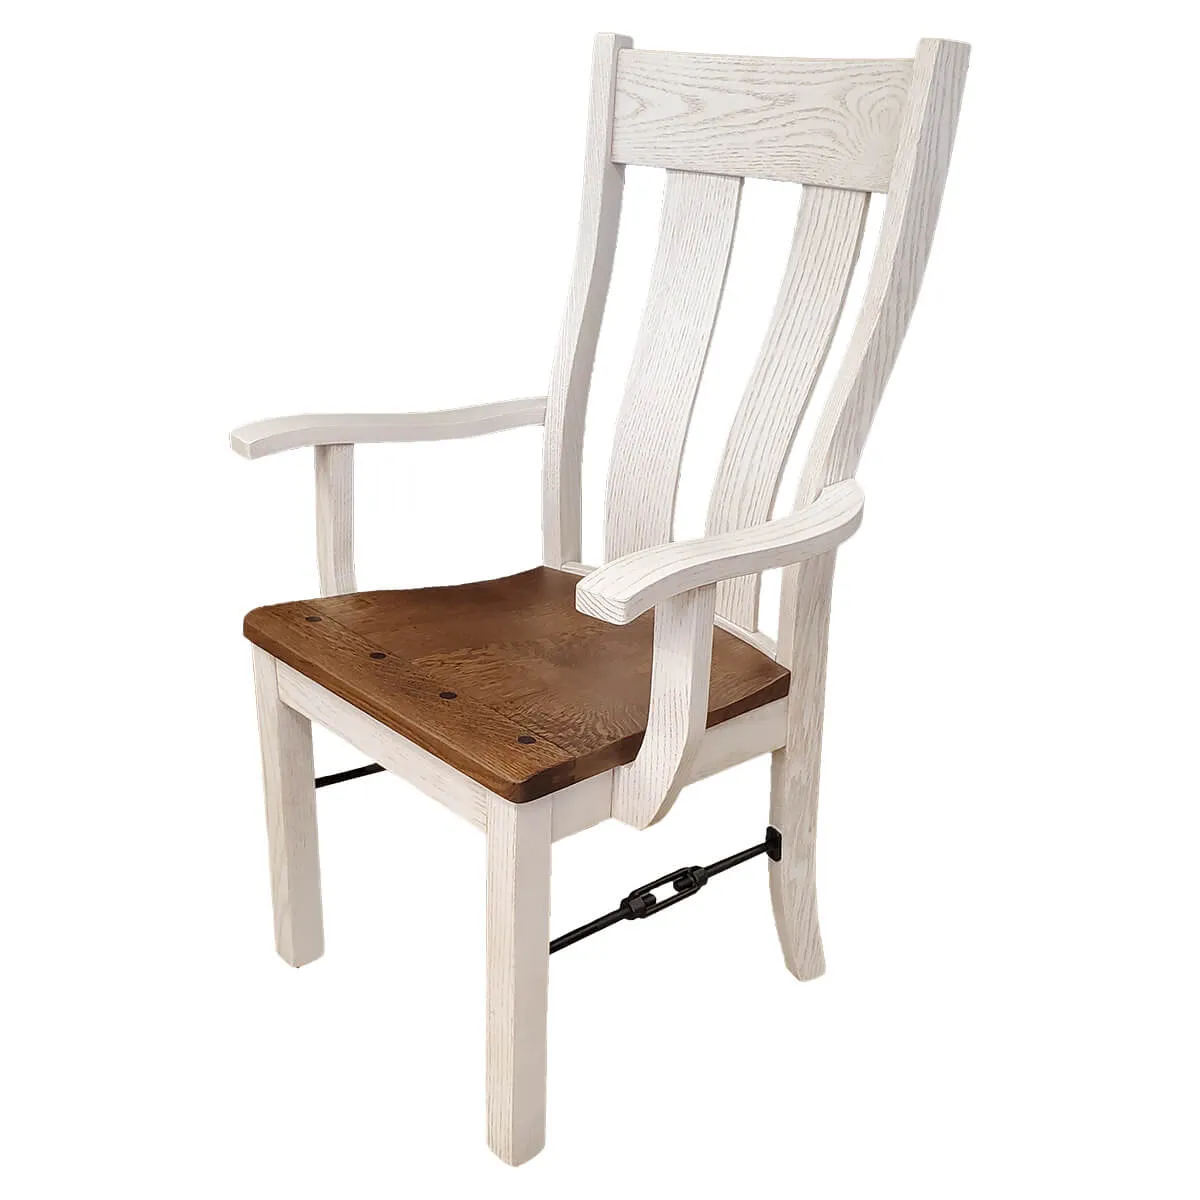 Urbana Arm Chair with Breadboard Seat and Turnbuckles